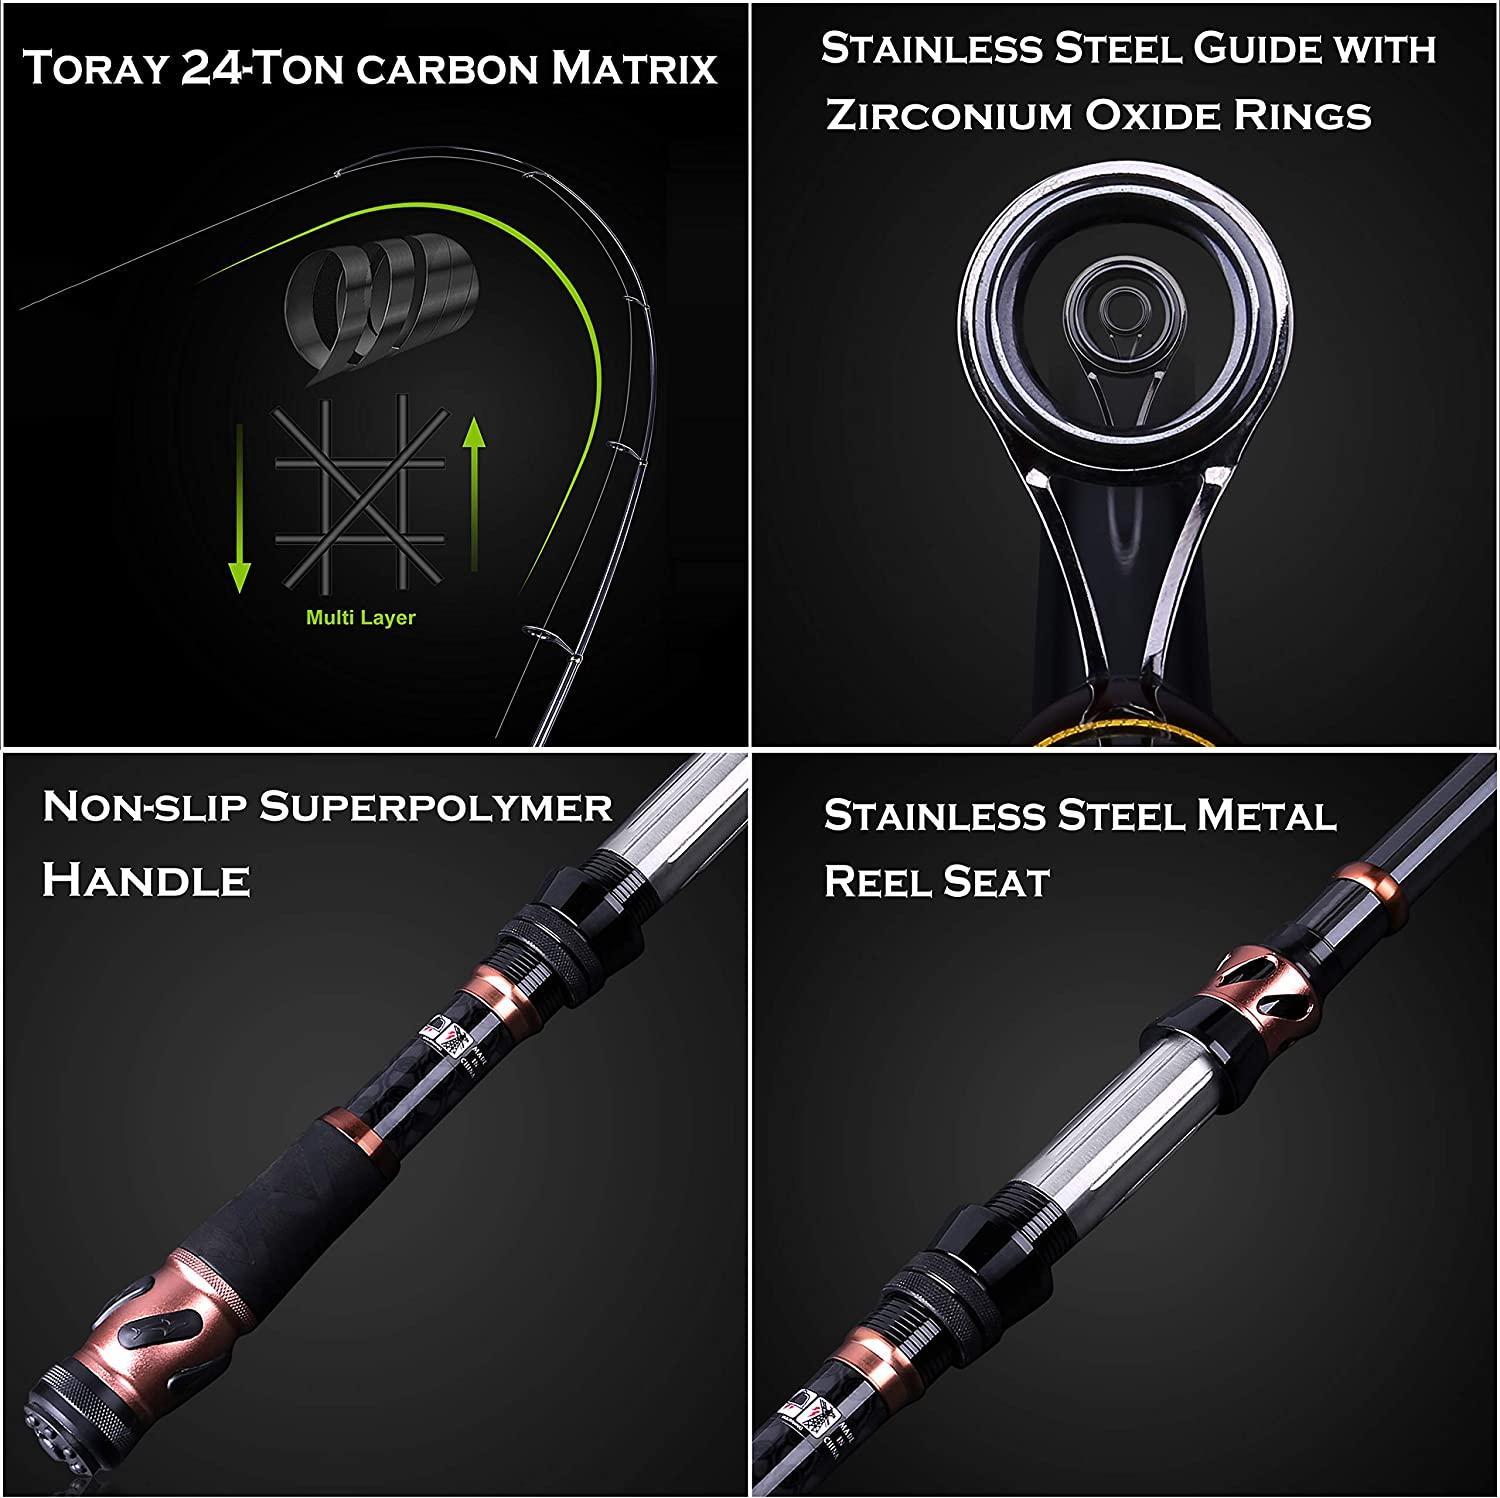 PLUSINNO Fishing Rod and Reel Combos - Carbon Fiber Telescopic Fishing Pole - Spinning Reel 12 +1 Shielded Bearings Stainless Steel Bb